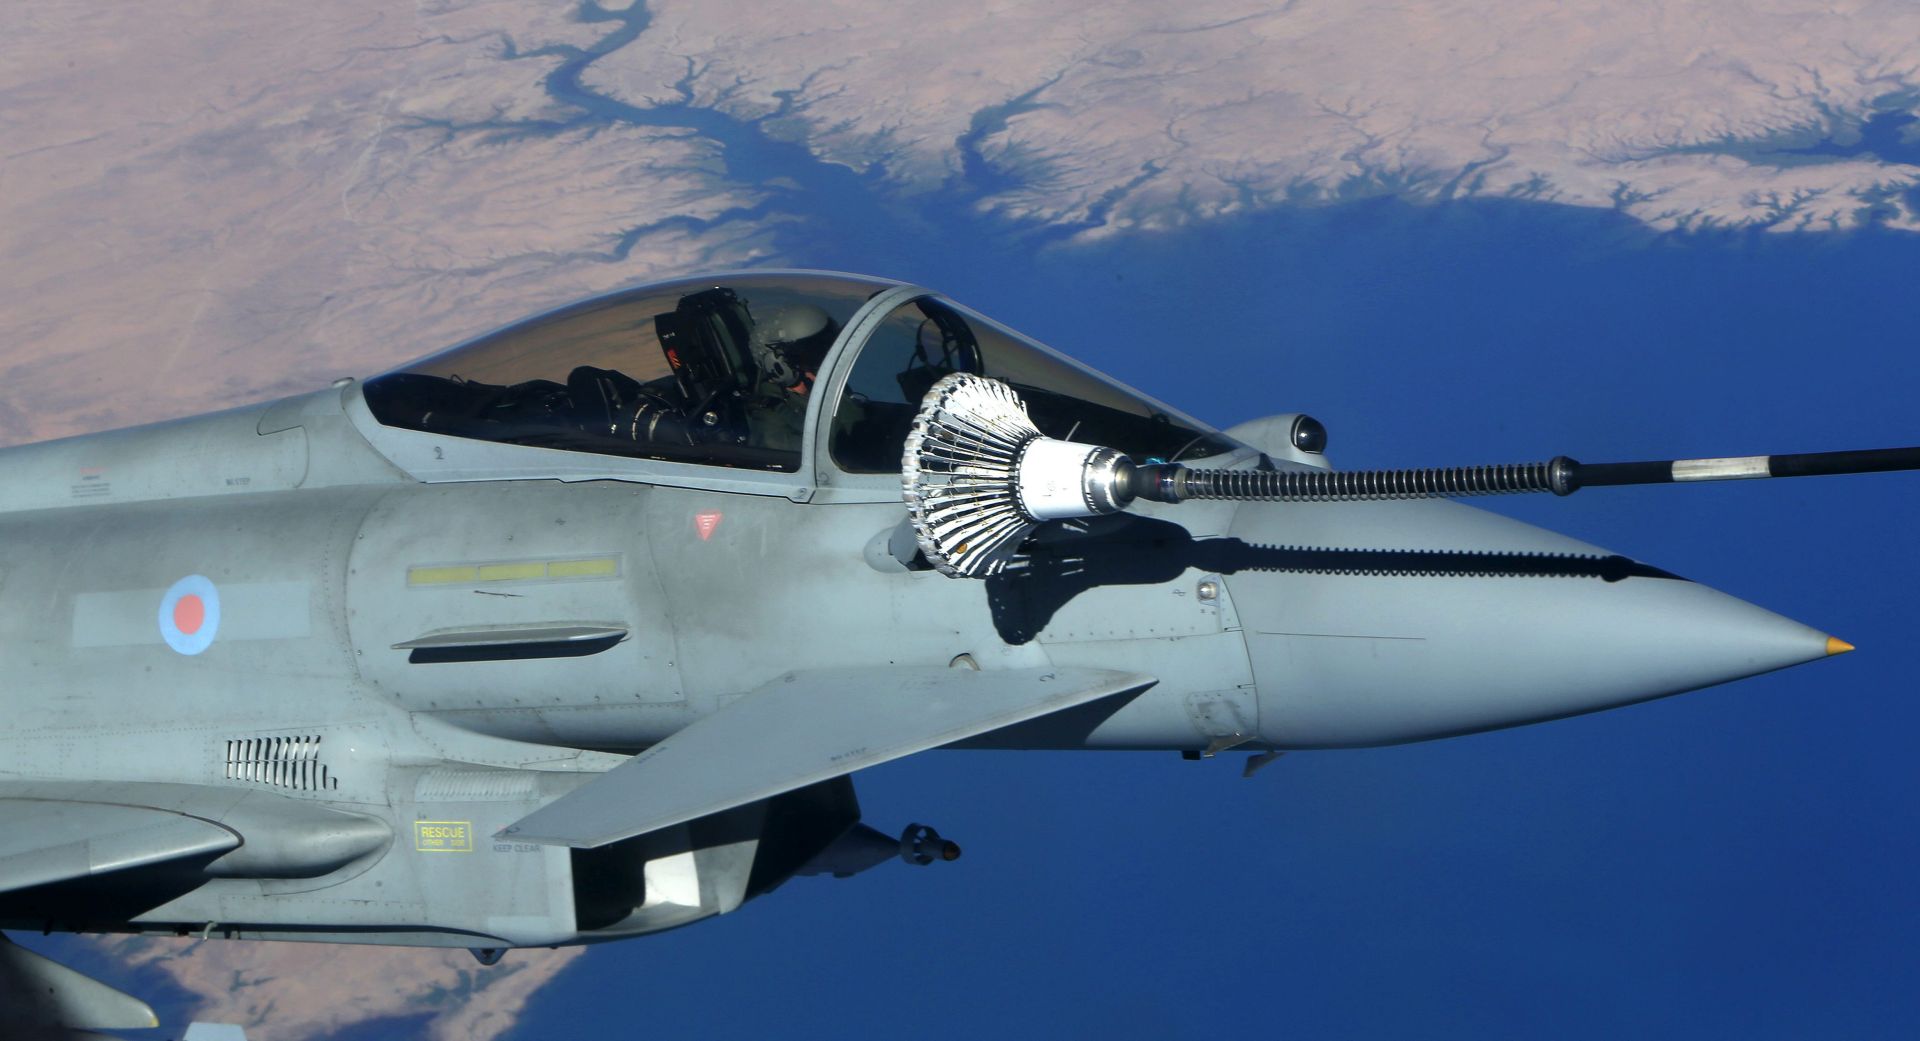 epa05554954 Photo made available 23 September 2016 of a typhoon aircraft refueling from a tanker aircraft during Operation Shader, at an undisclosed location in Iraq, 21 September 2016. British Tornado and Typhoon aircraft are attacking Islamic State targets ahead of a major offensive by Iraqi security forces to recapture the key Iraqi city of Mosul.  EPA/PETROS KARADJIAS/ POOL 
Photos have been submitted to British military officials in the UK in accordance with security requirements